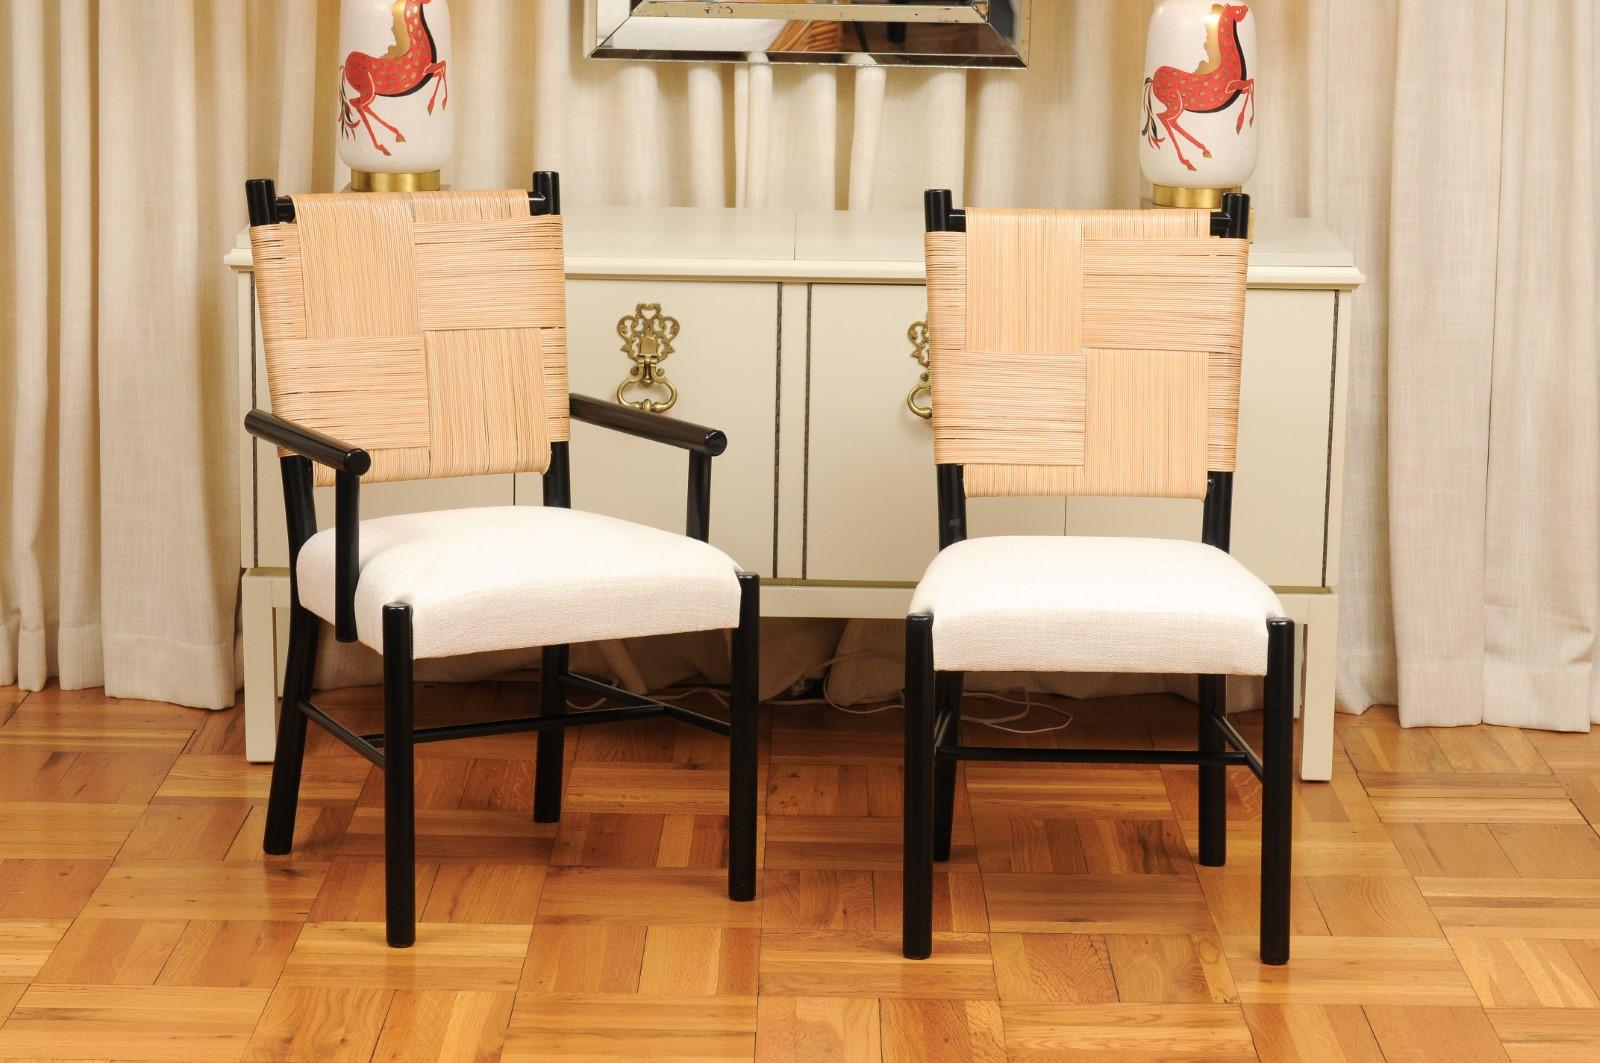 This magnificent large set of dining chairs is Unique on the World market. The set is shipped as professionally photographed and described in the listing narrative: Meticulously professionally restored, newly custom upholstered and completely